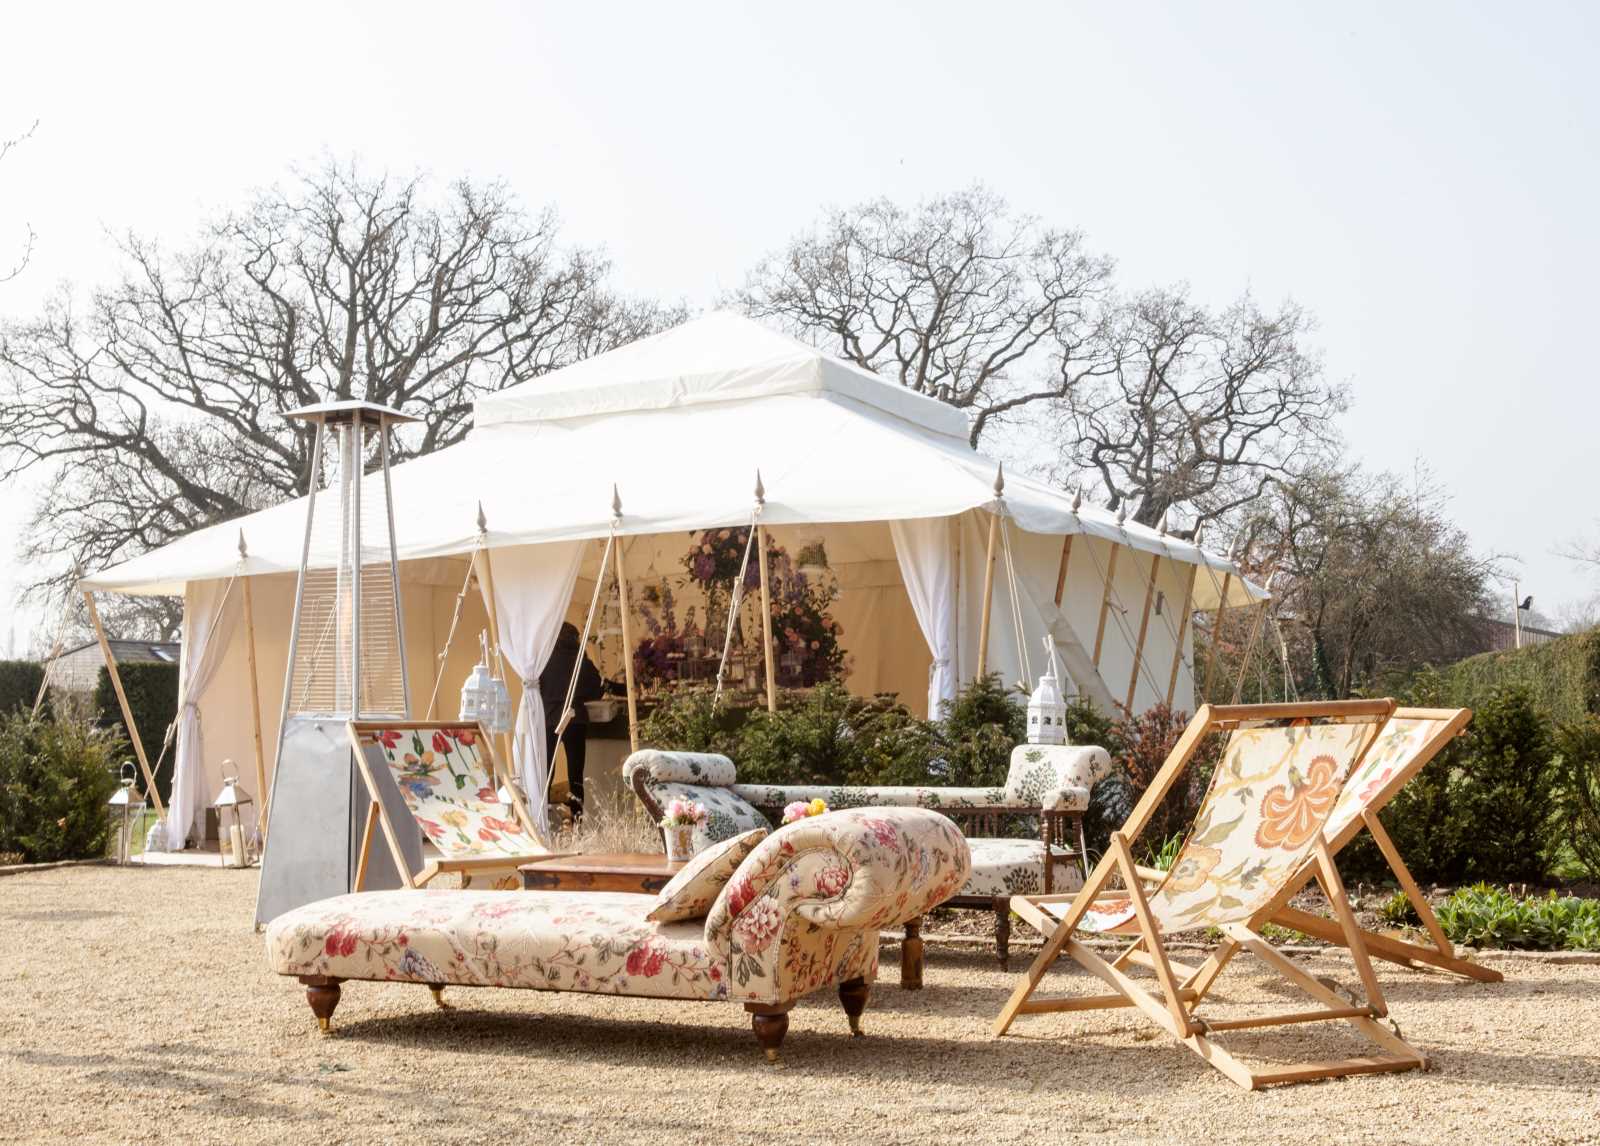 William Morris chaise lounge and deckchairs outside the Lulu tent